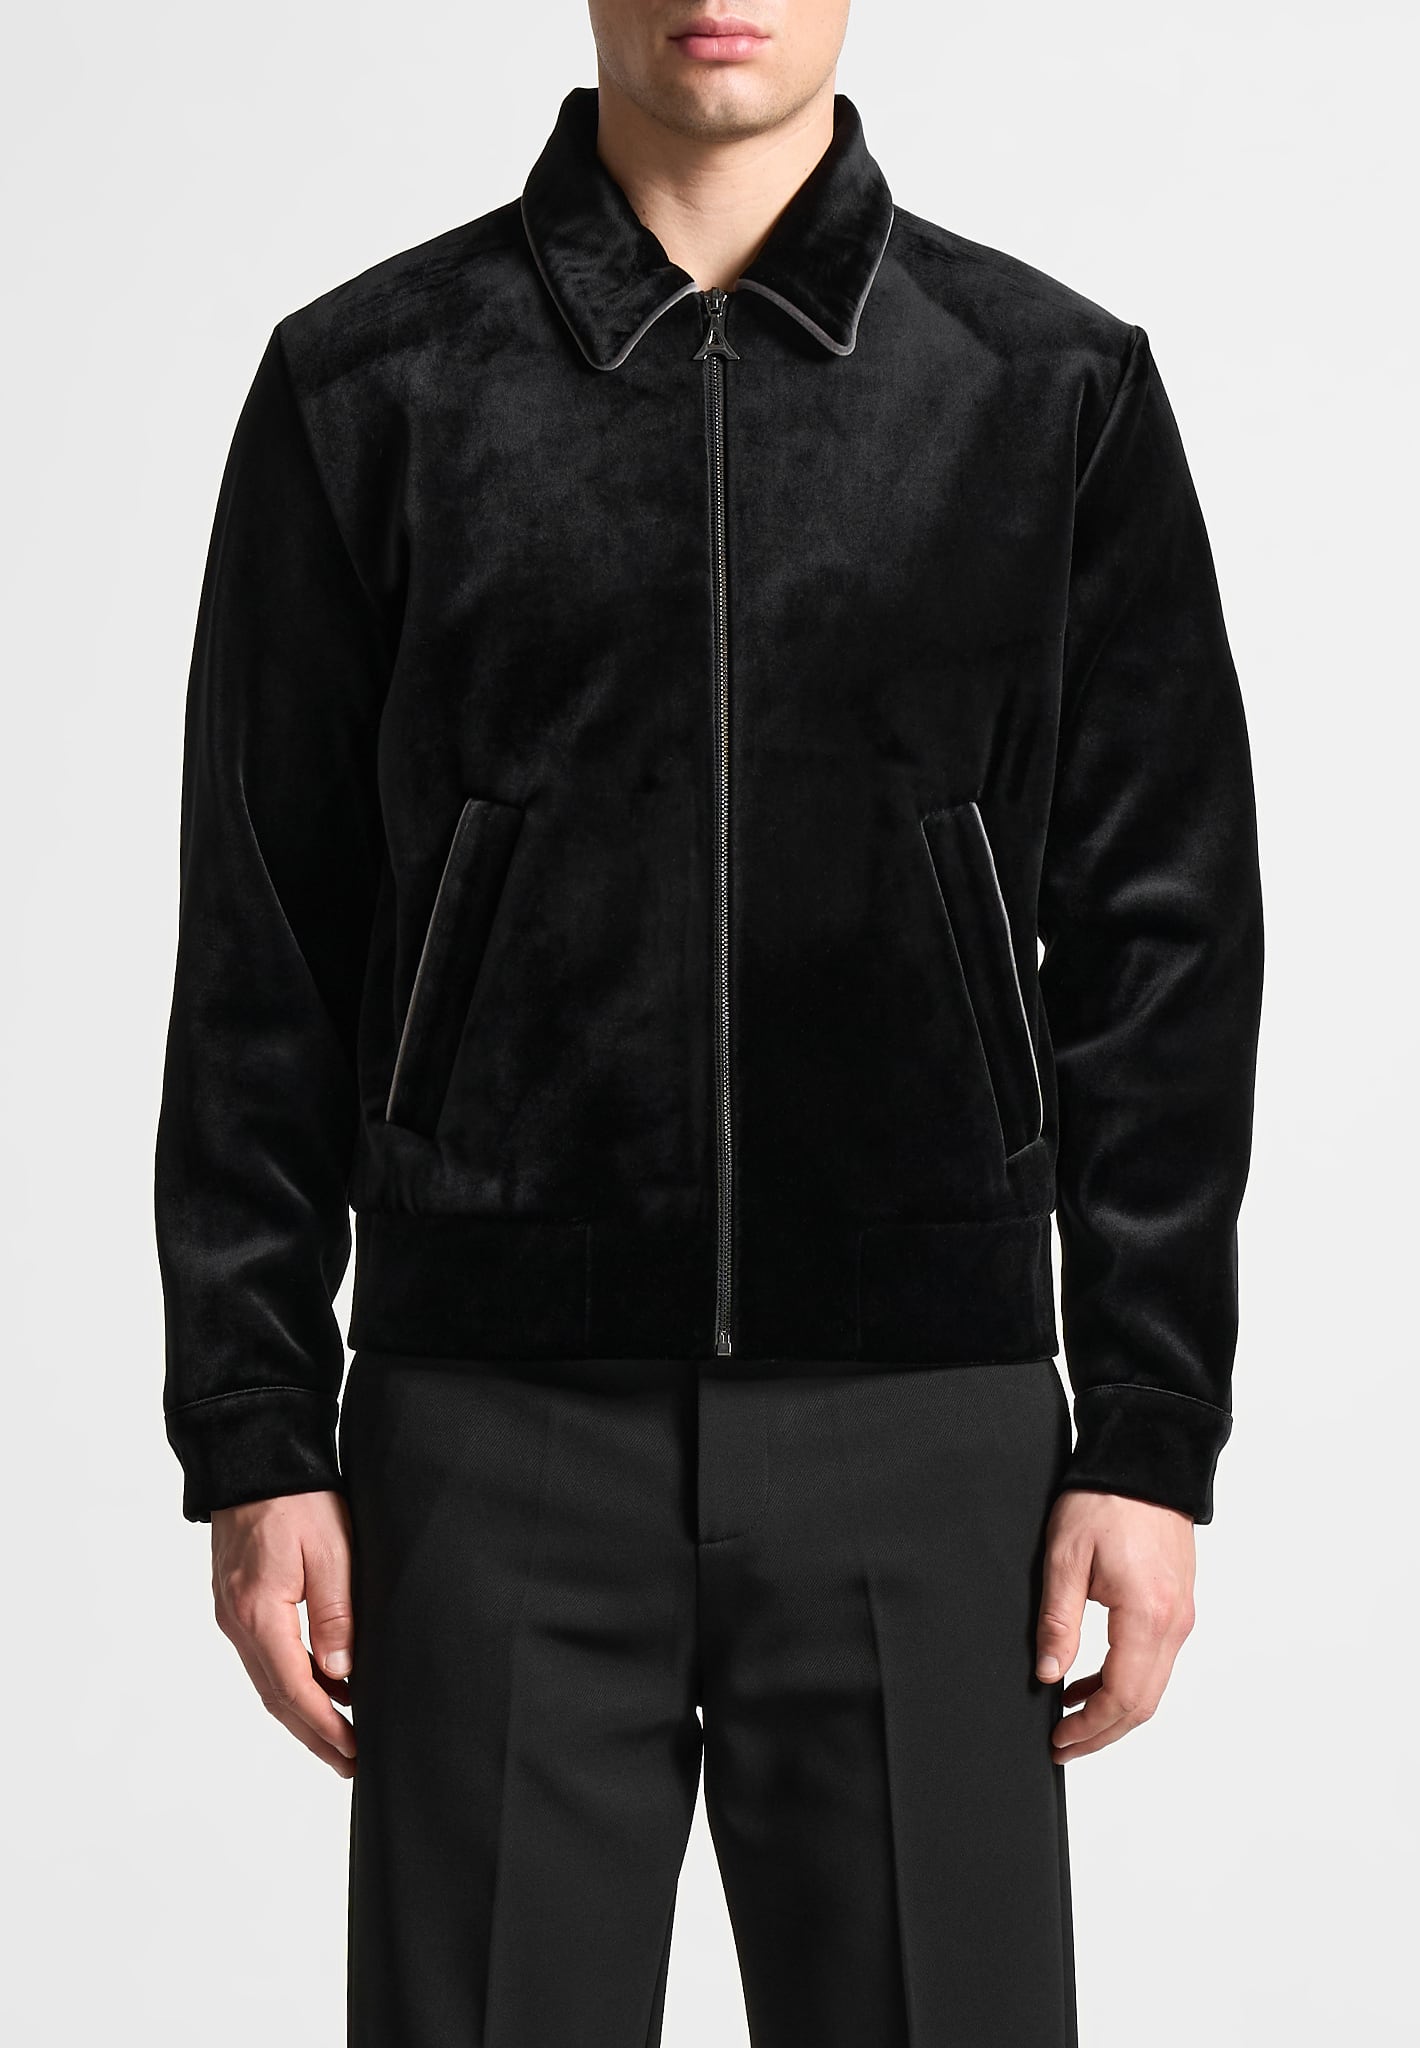 velvet-jacket-with-contrast-piping-black